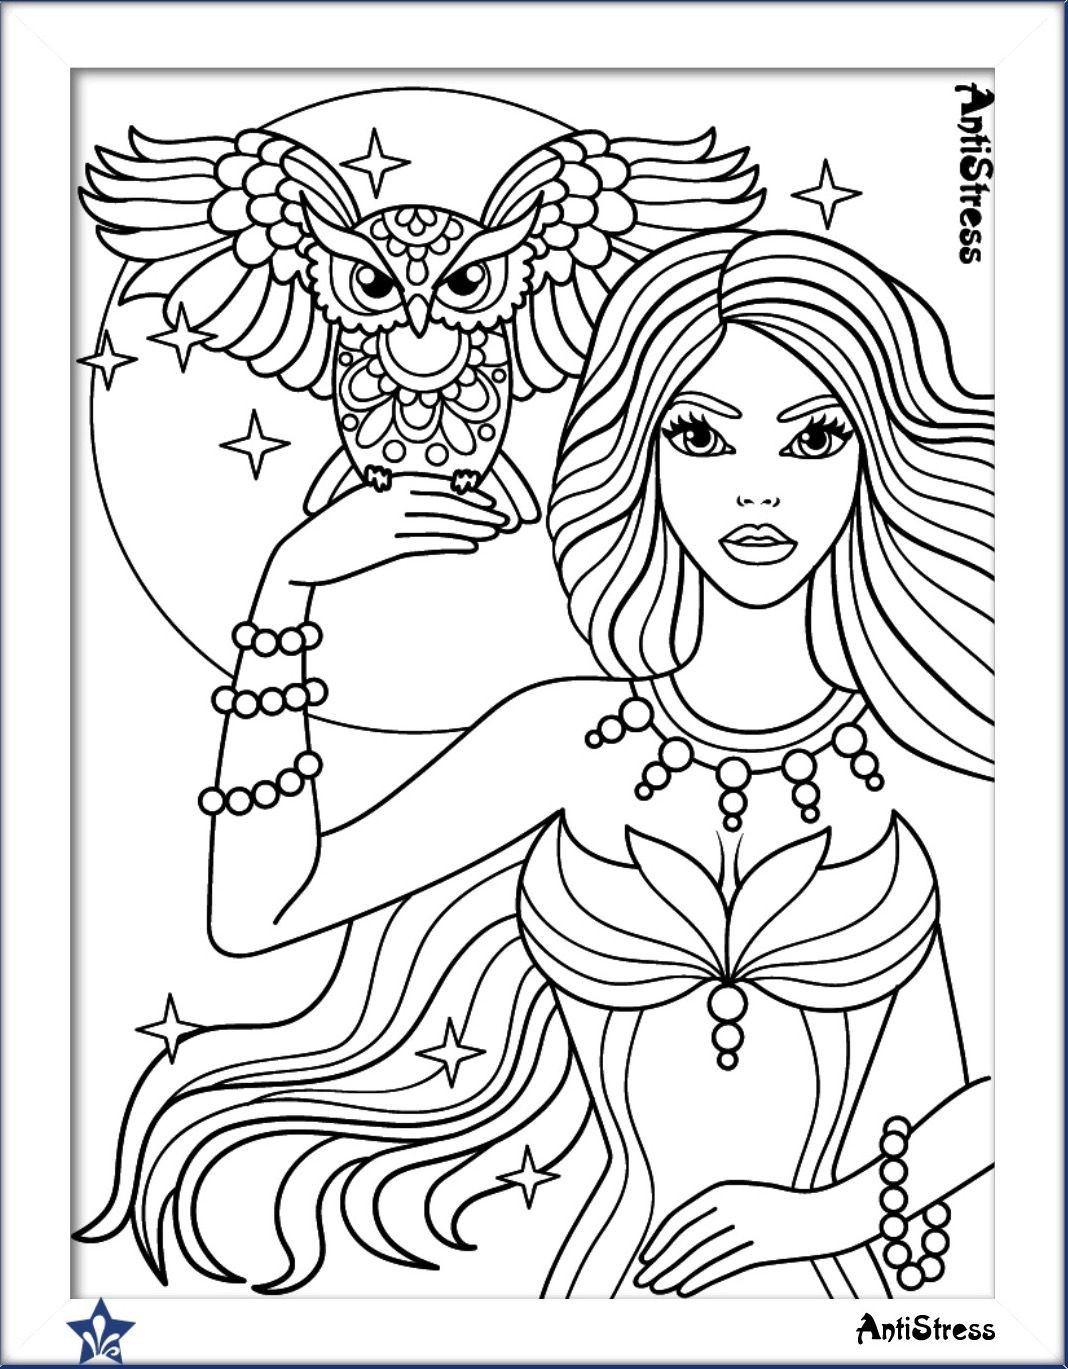 Coloring Pages Adults Girl
 Owl and girl coloring page